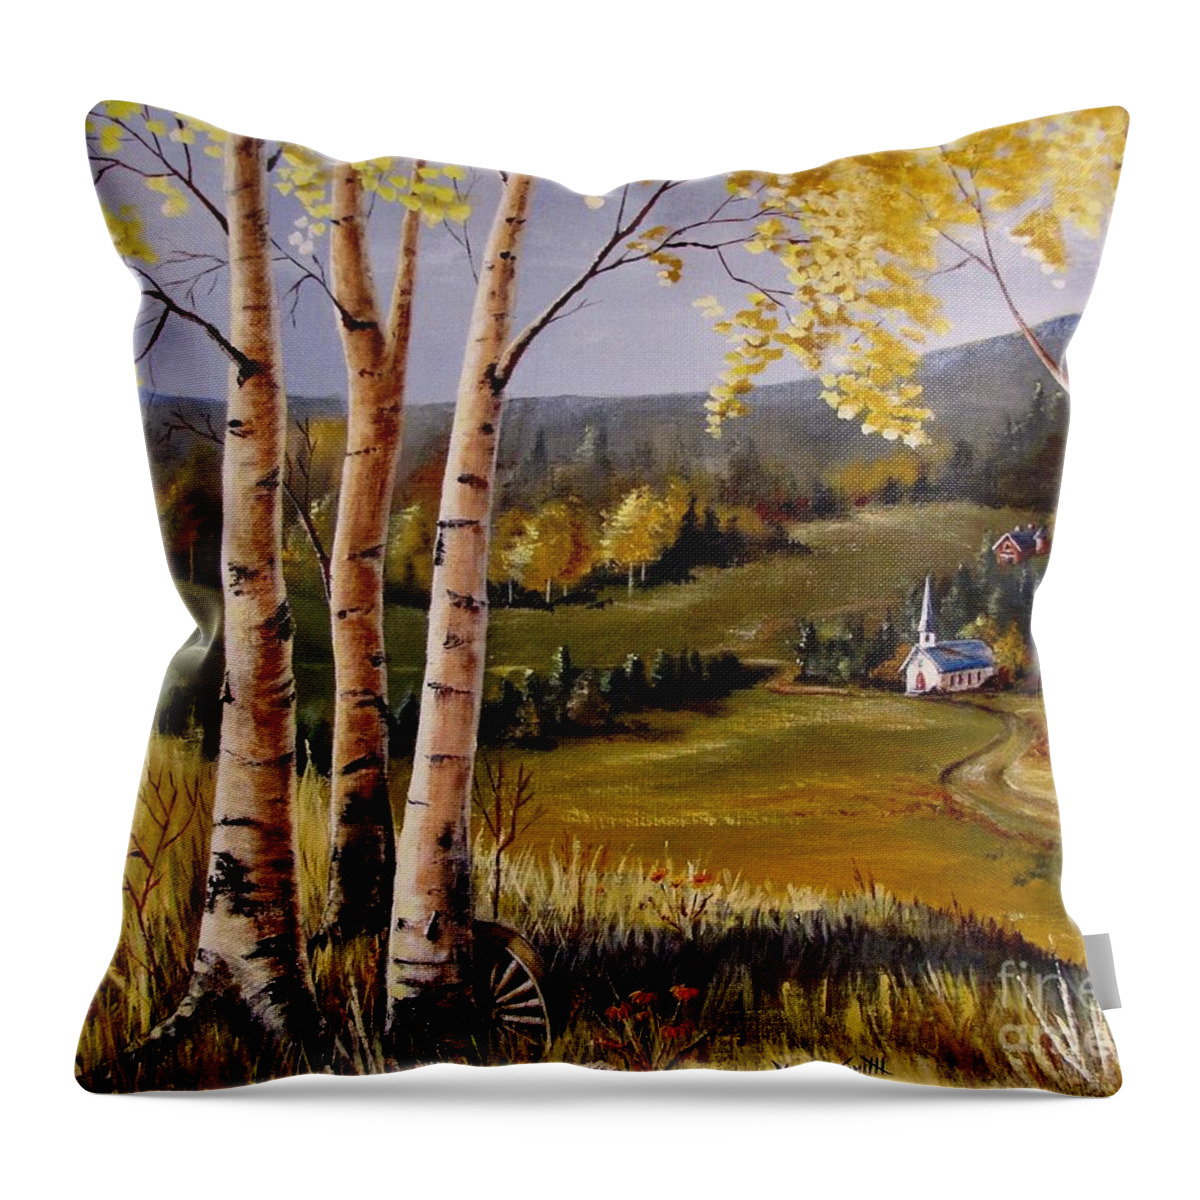 Country Church Throw Pillow featuring the painting Country Church by Marilyn Smith